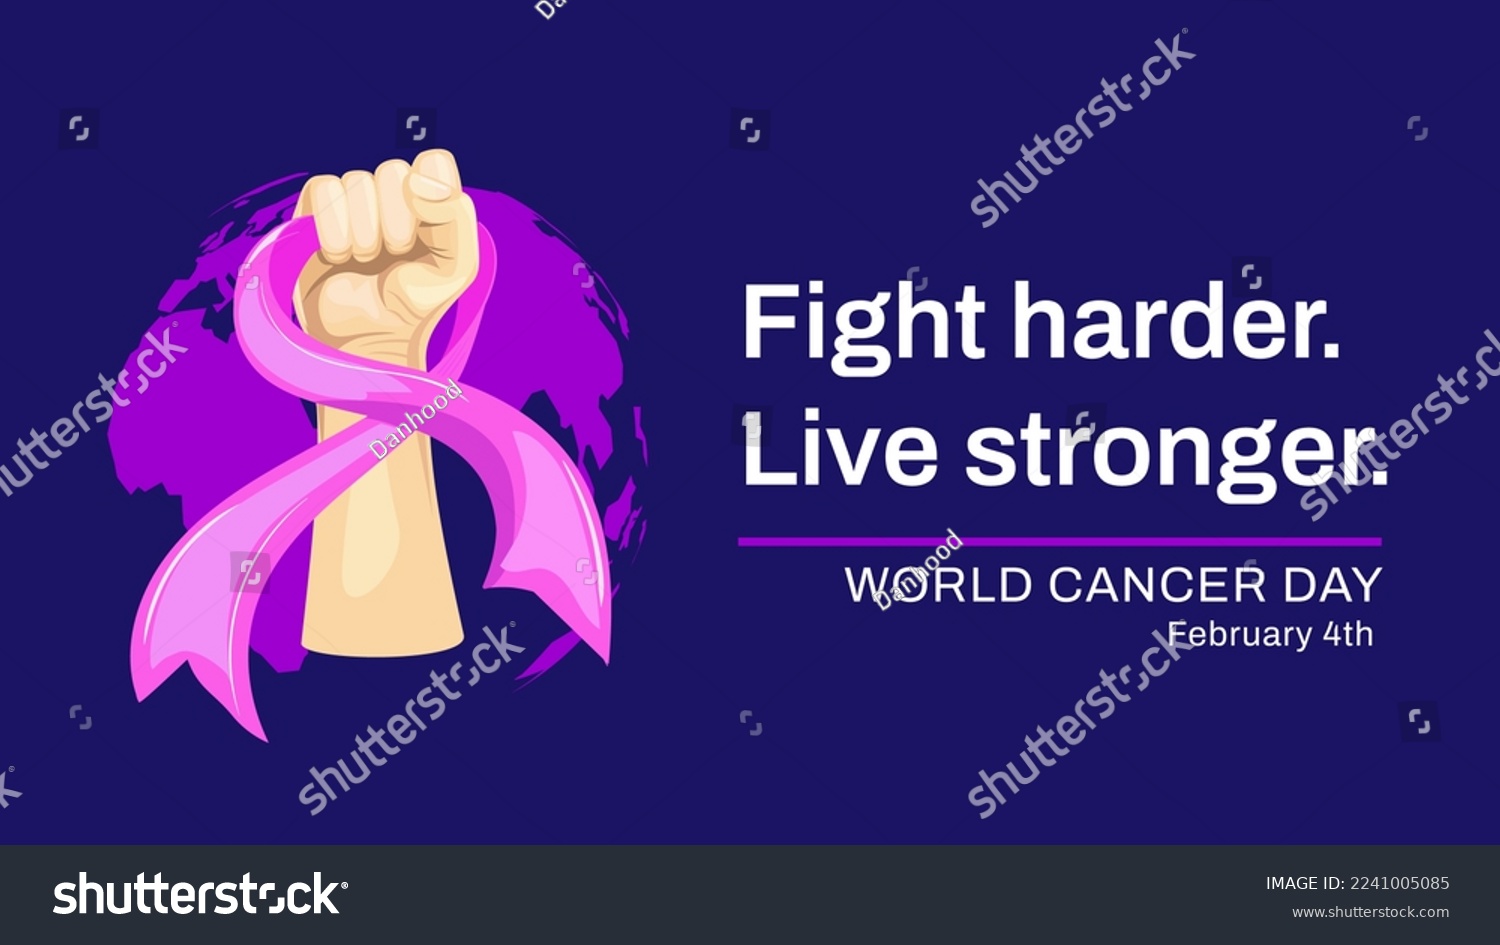 SVG of World Cancer Day illustration banner with motivational quote. Hand holding Pink ribbon on dark background svg